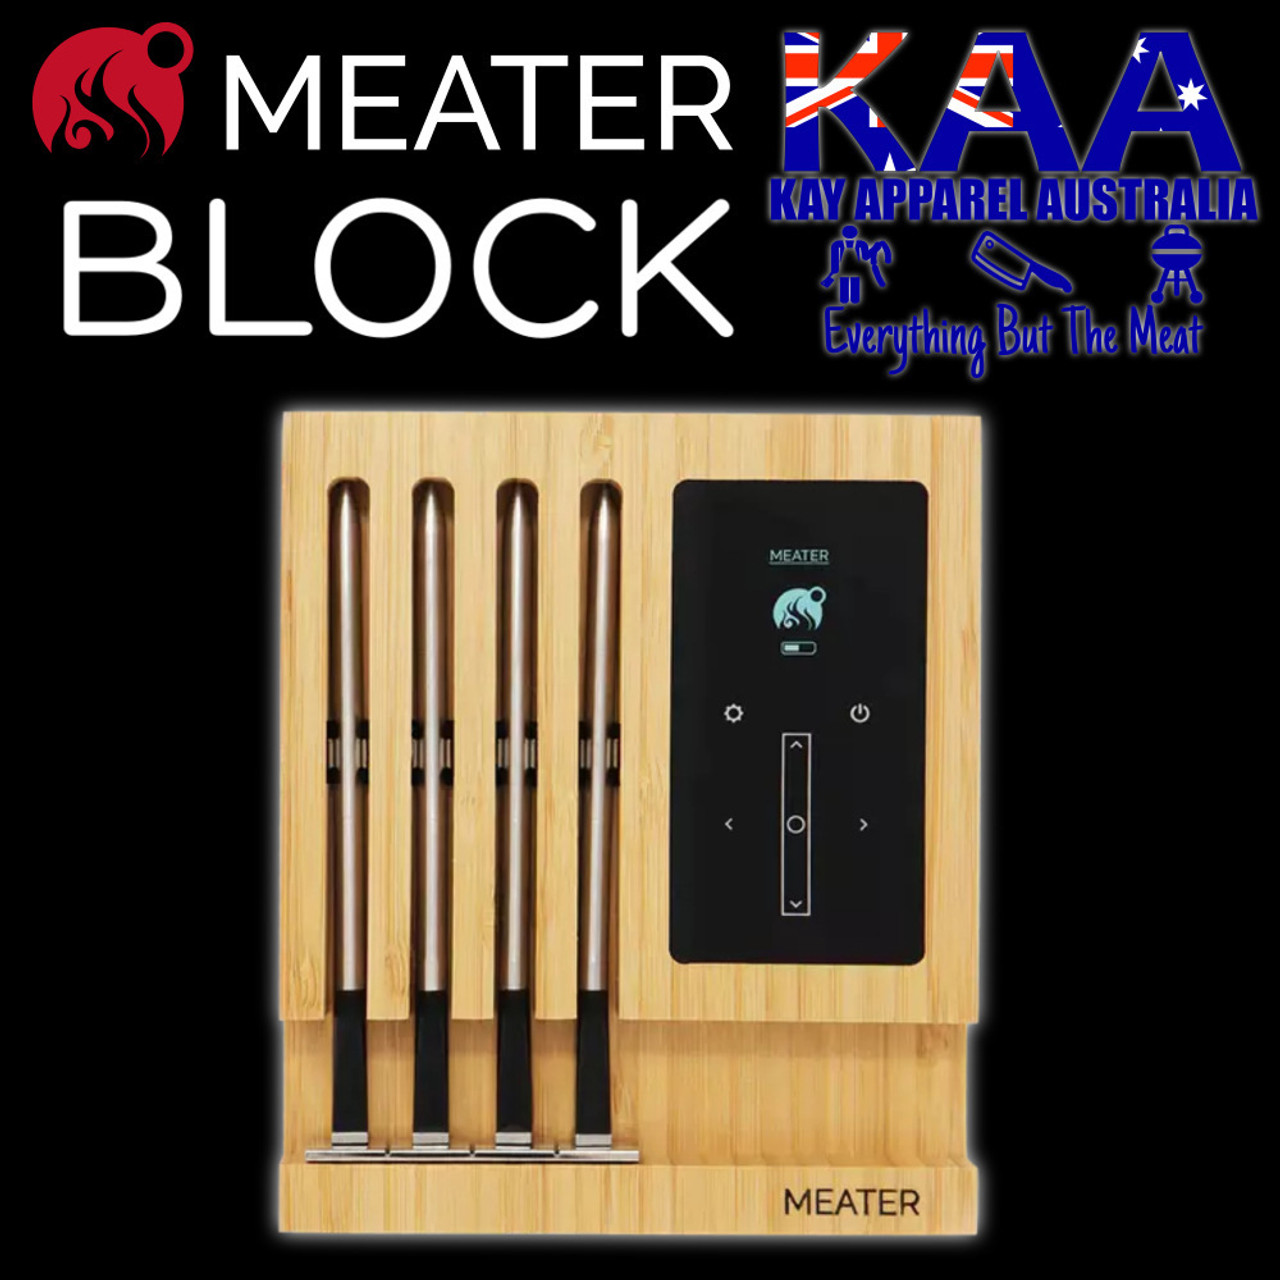 MEATER BLOCK, Premium WiFi Smart Meat Thermometer - Kay Apparel